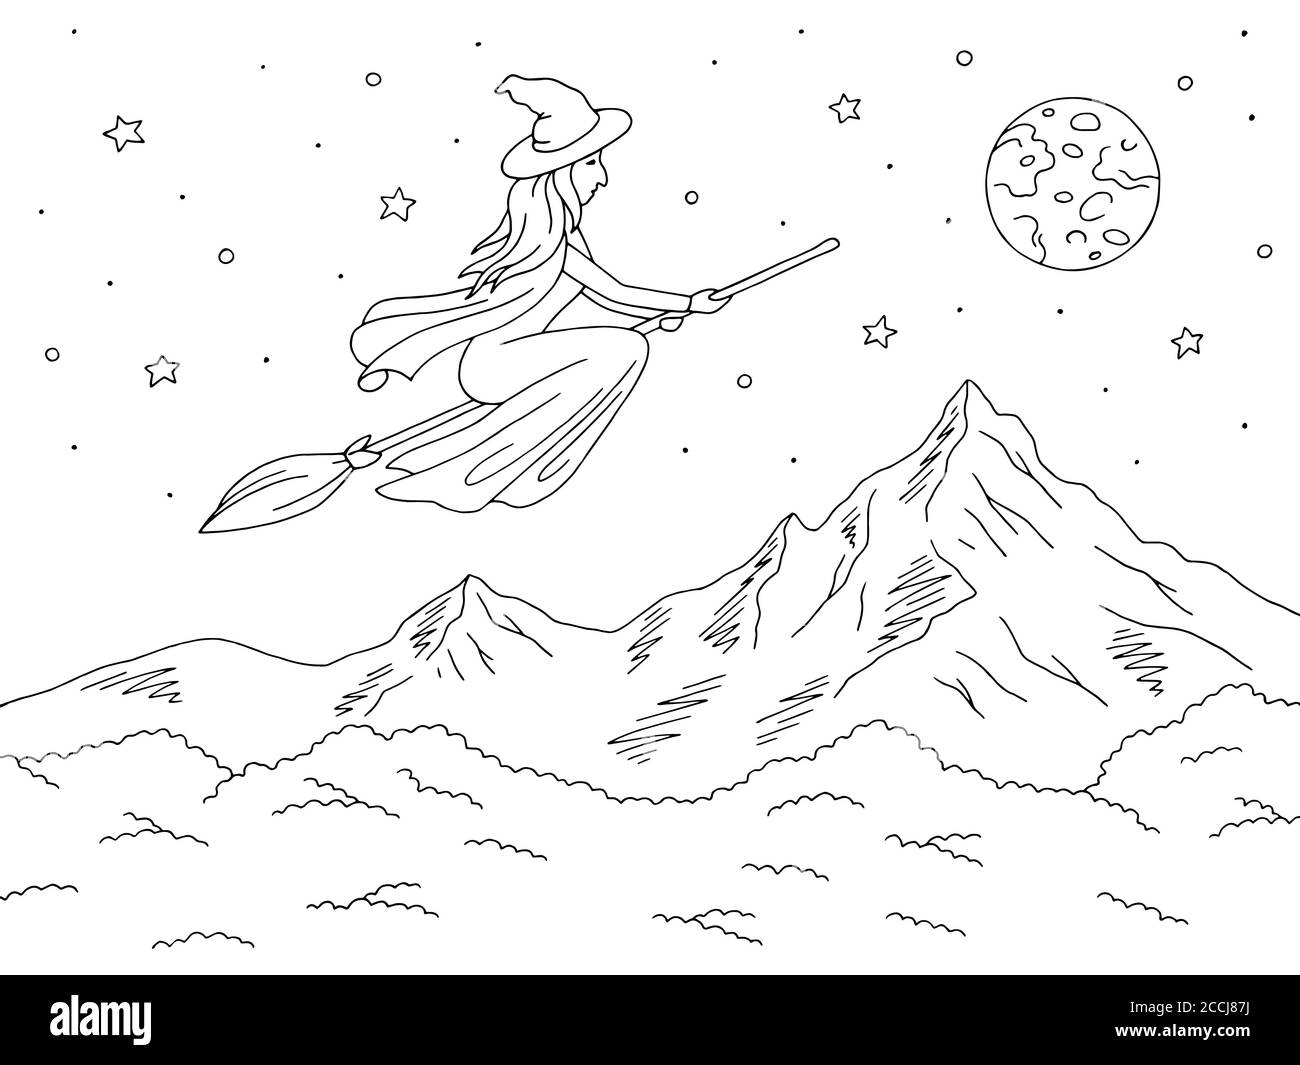 Witch flying on a broomstick. Mountain graphic black white landscape sketch illustration vector Stock Vector